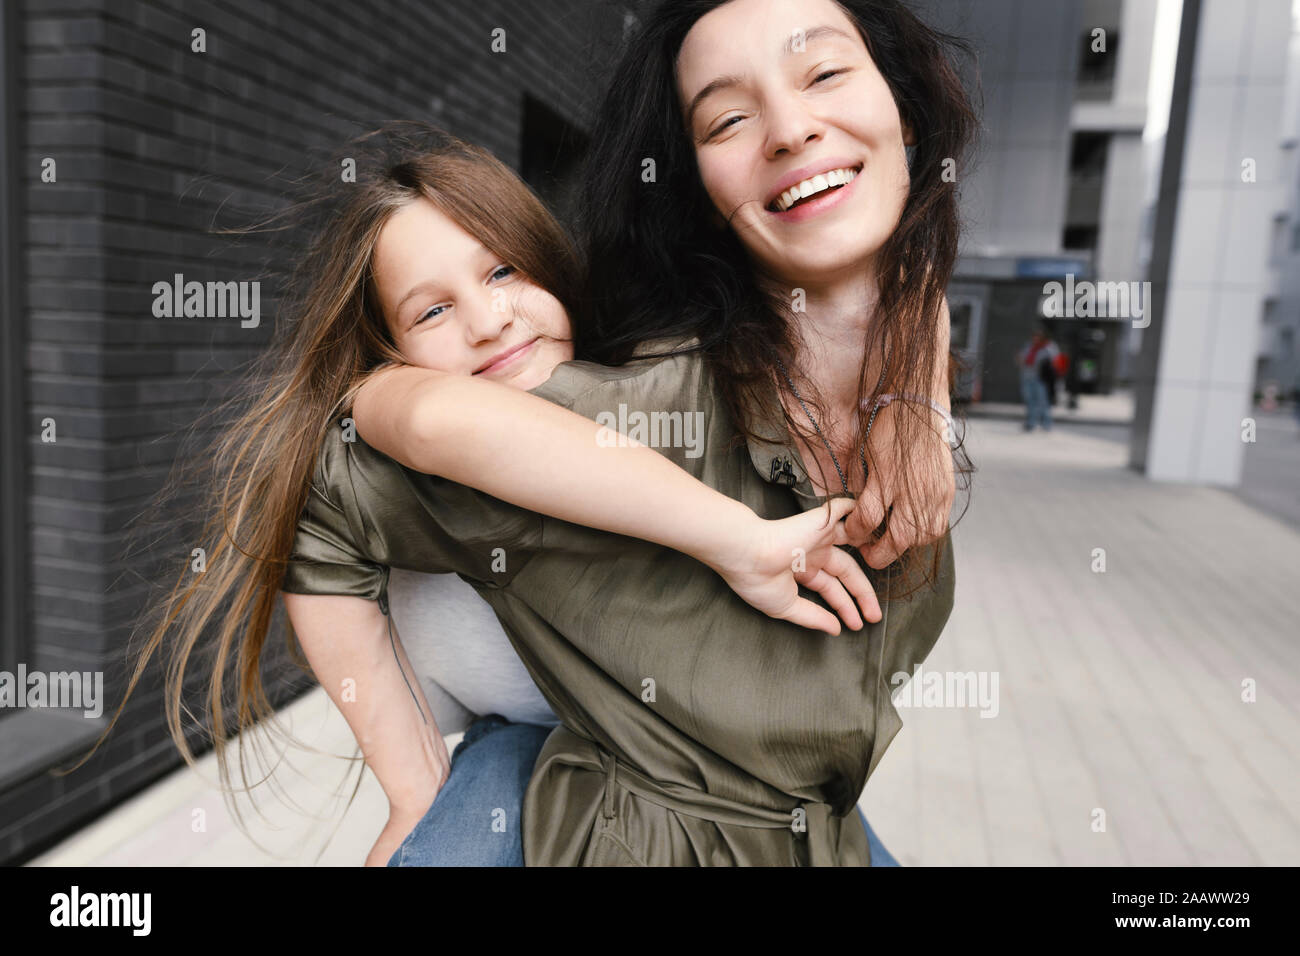 Portrait of happy mother giving her daughter a piggyback ride Stock Photo